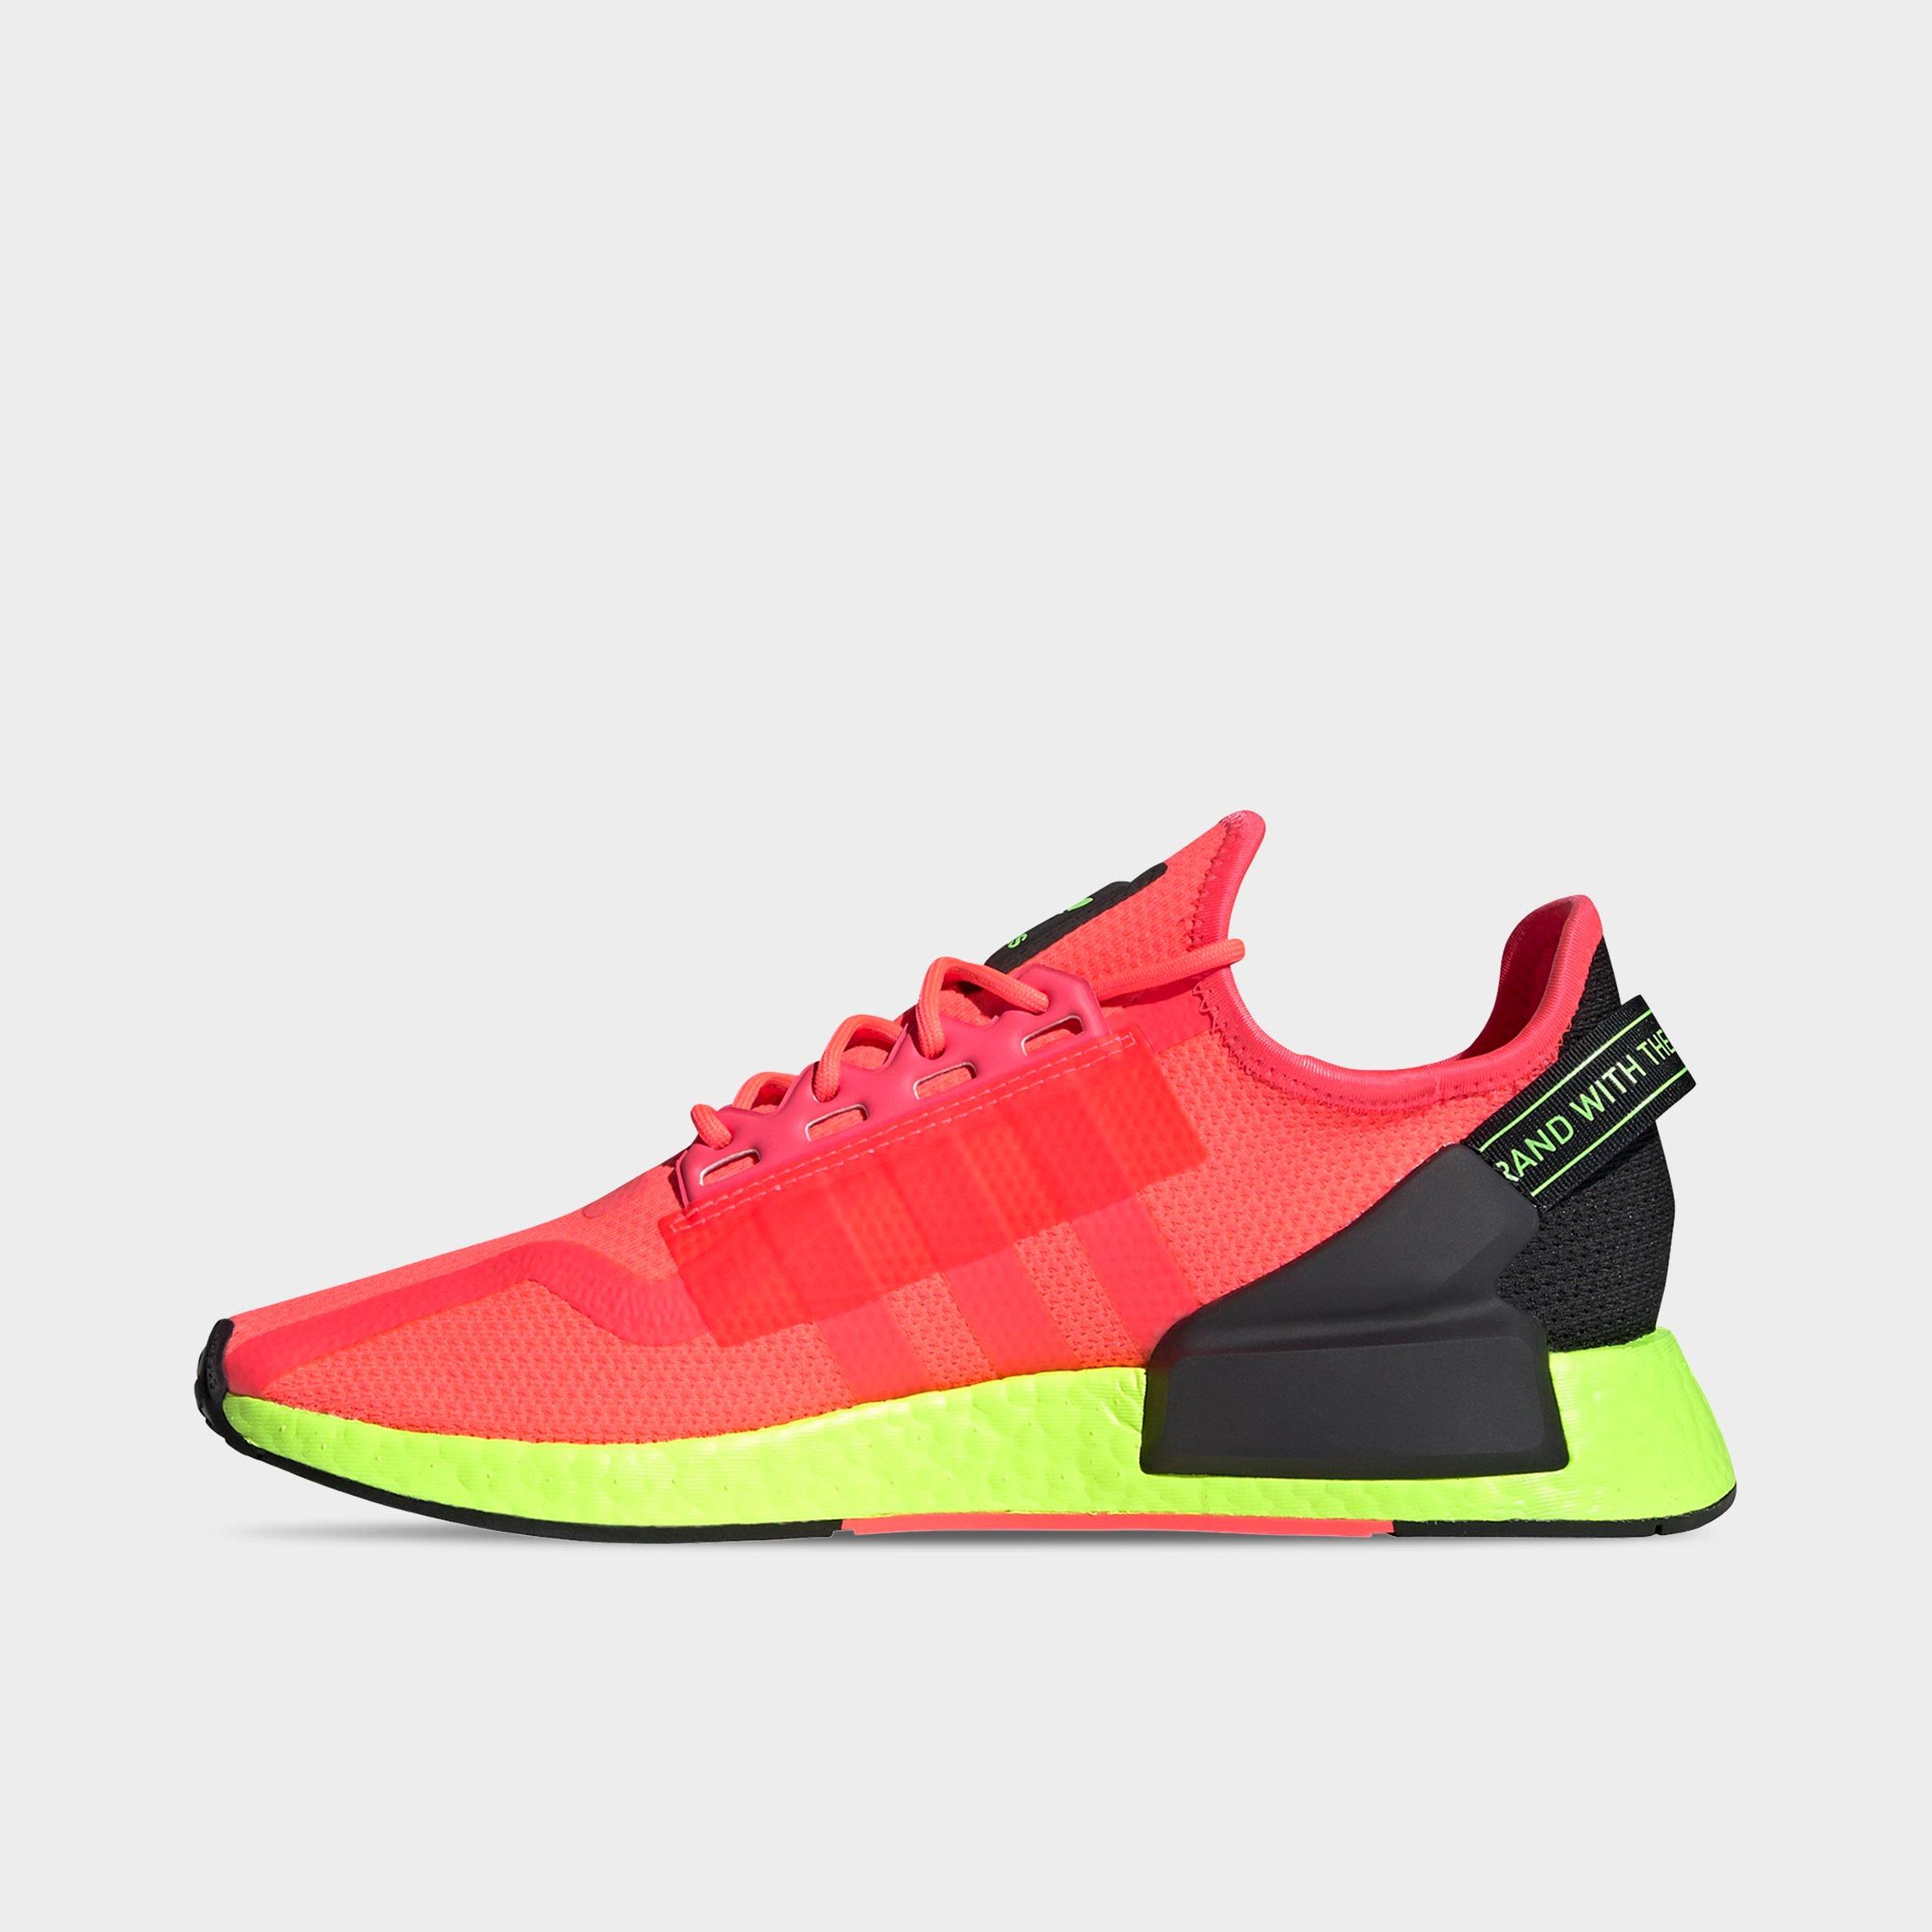 men's adidas nmd r1 v2 casual shoes